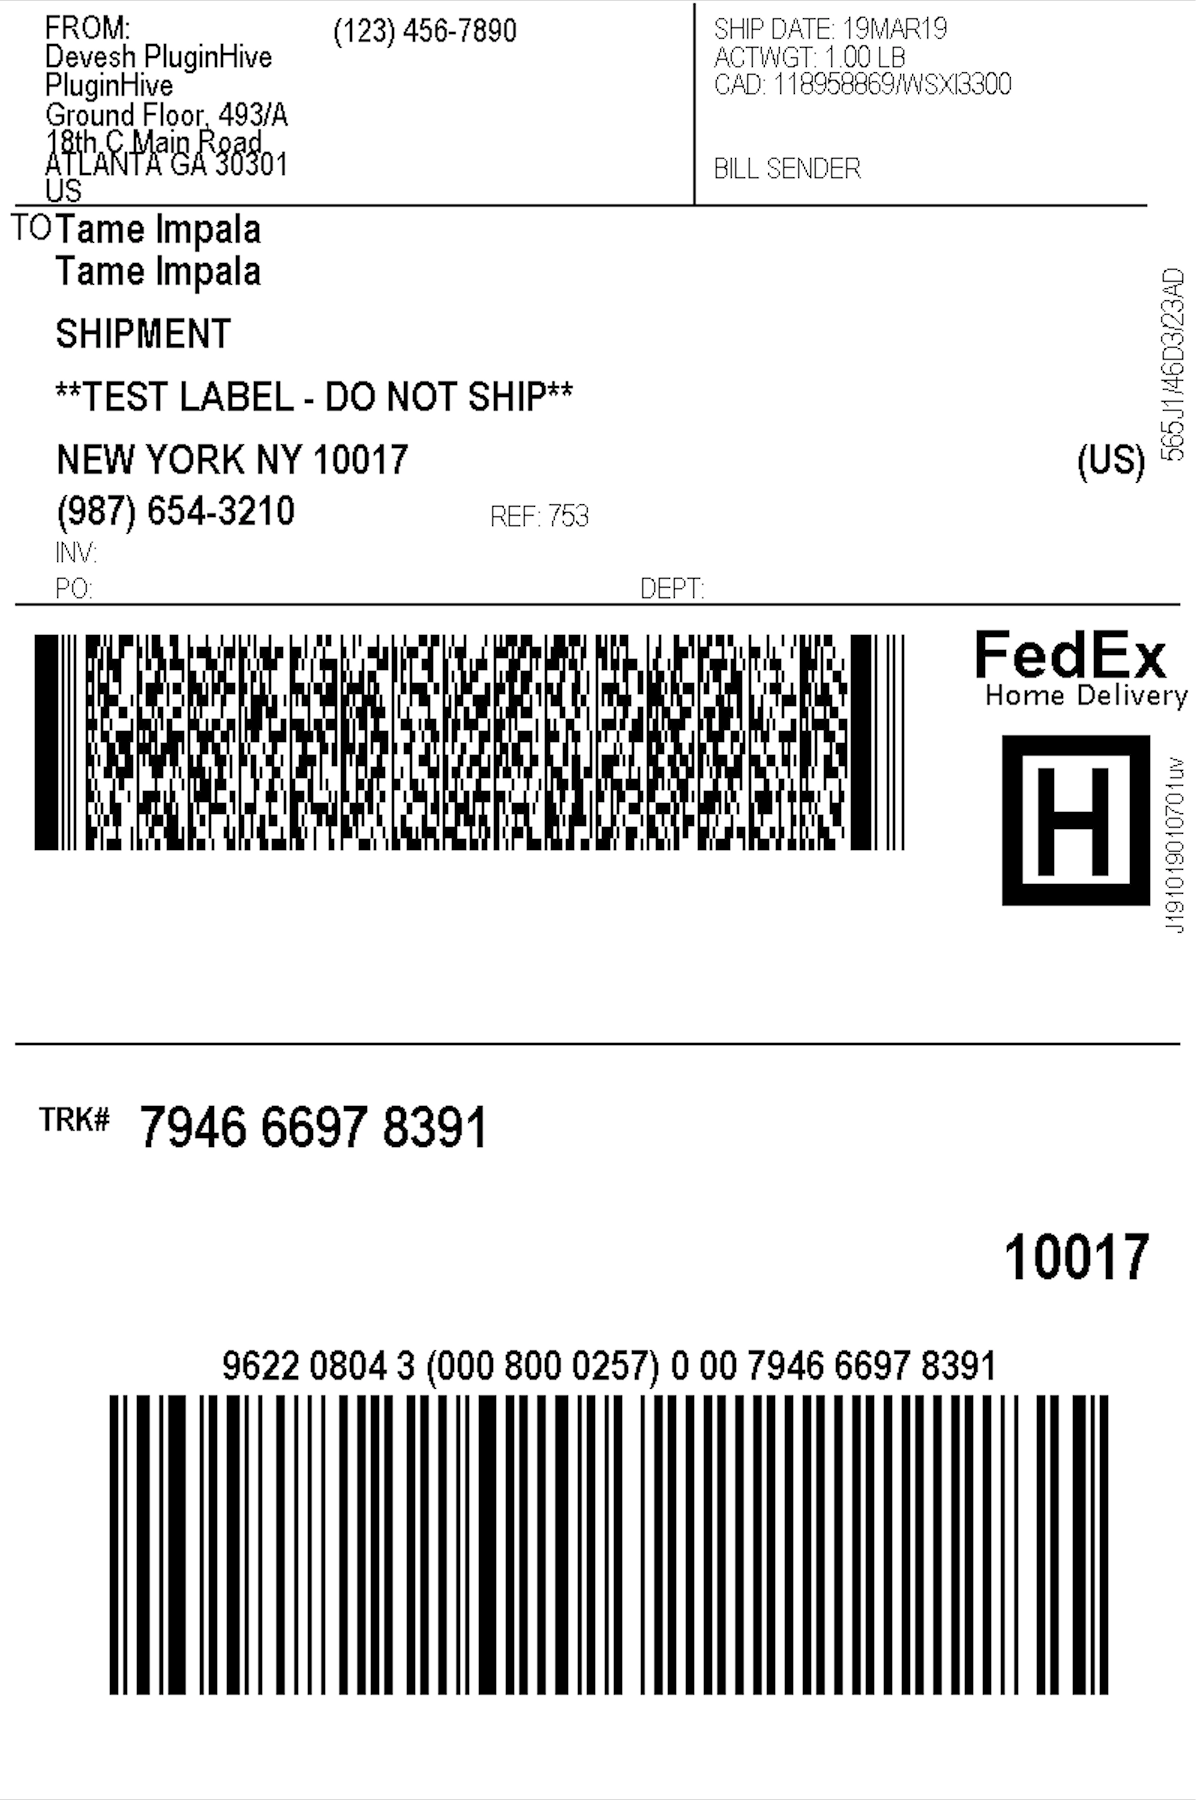 FedEx Ground DOMESTIC Shipping Enter the address at checkout.